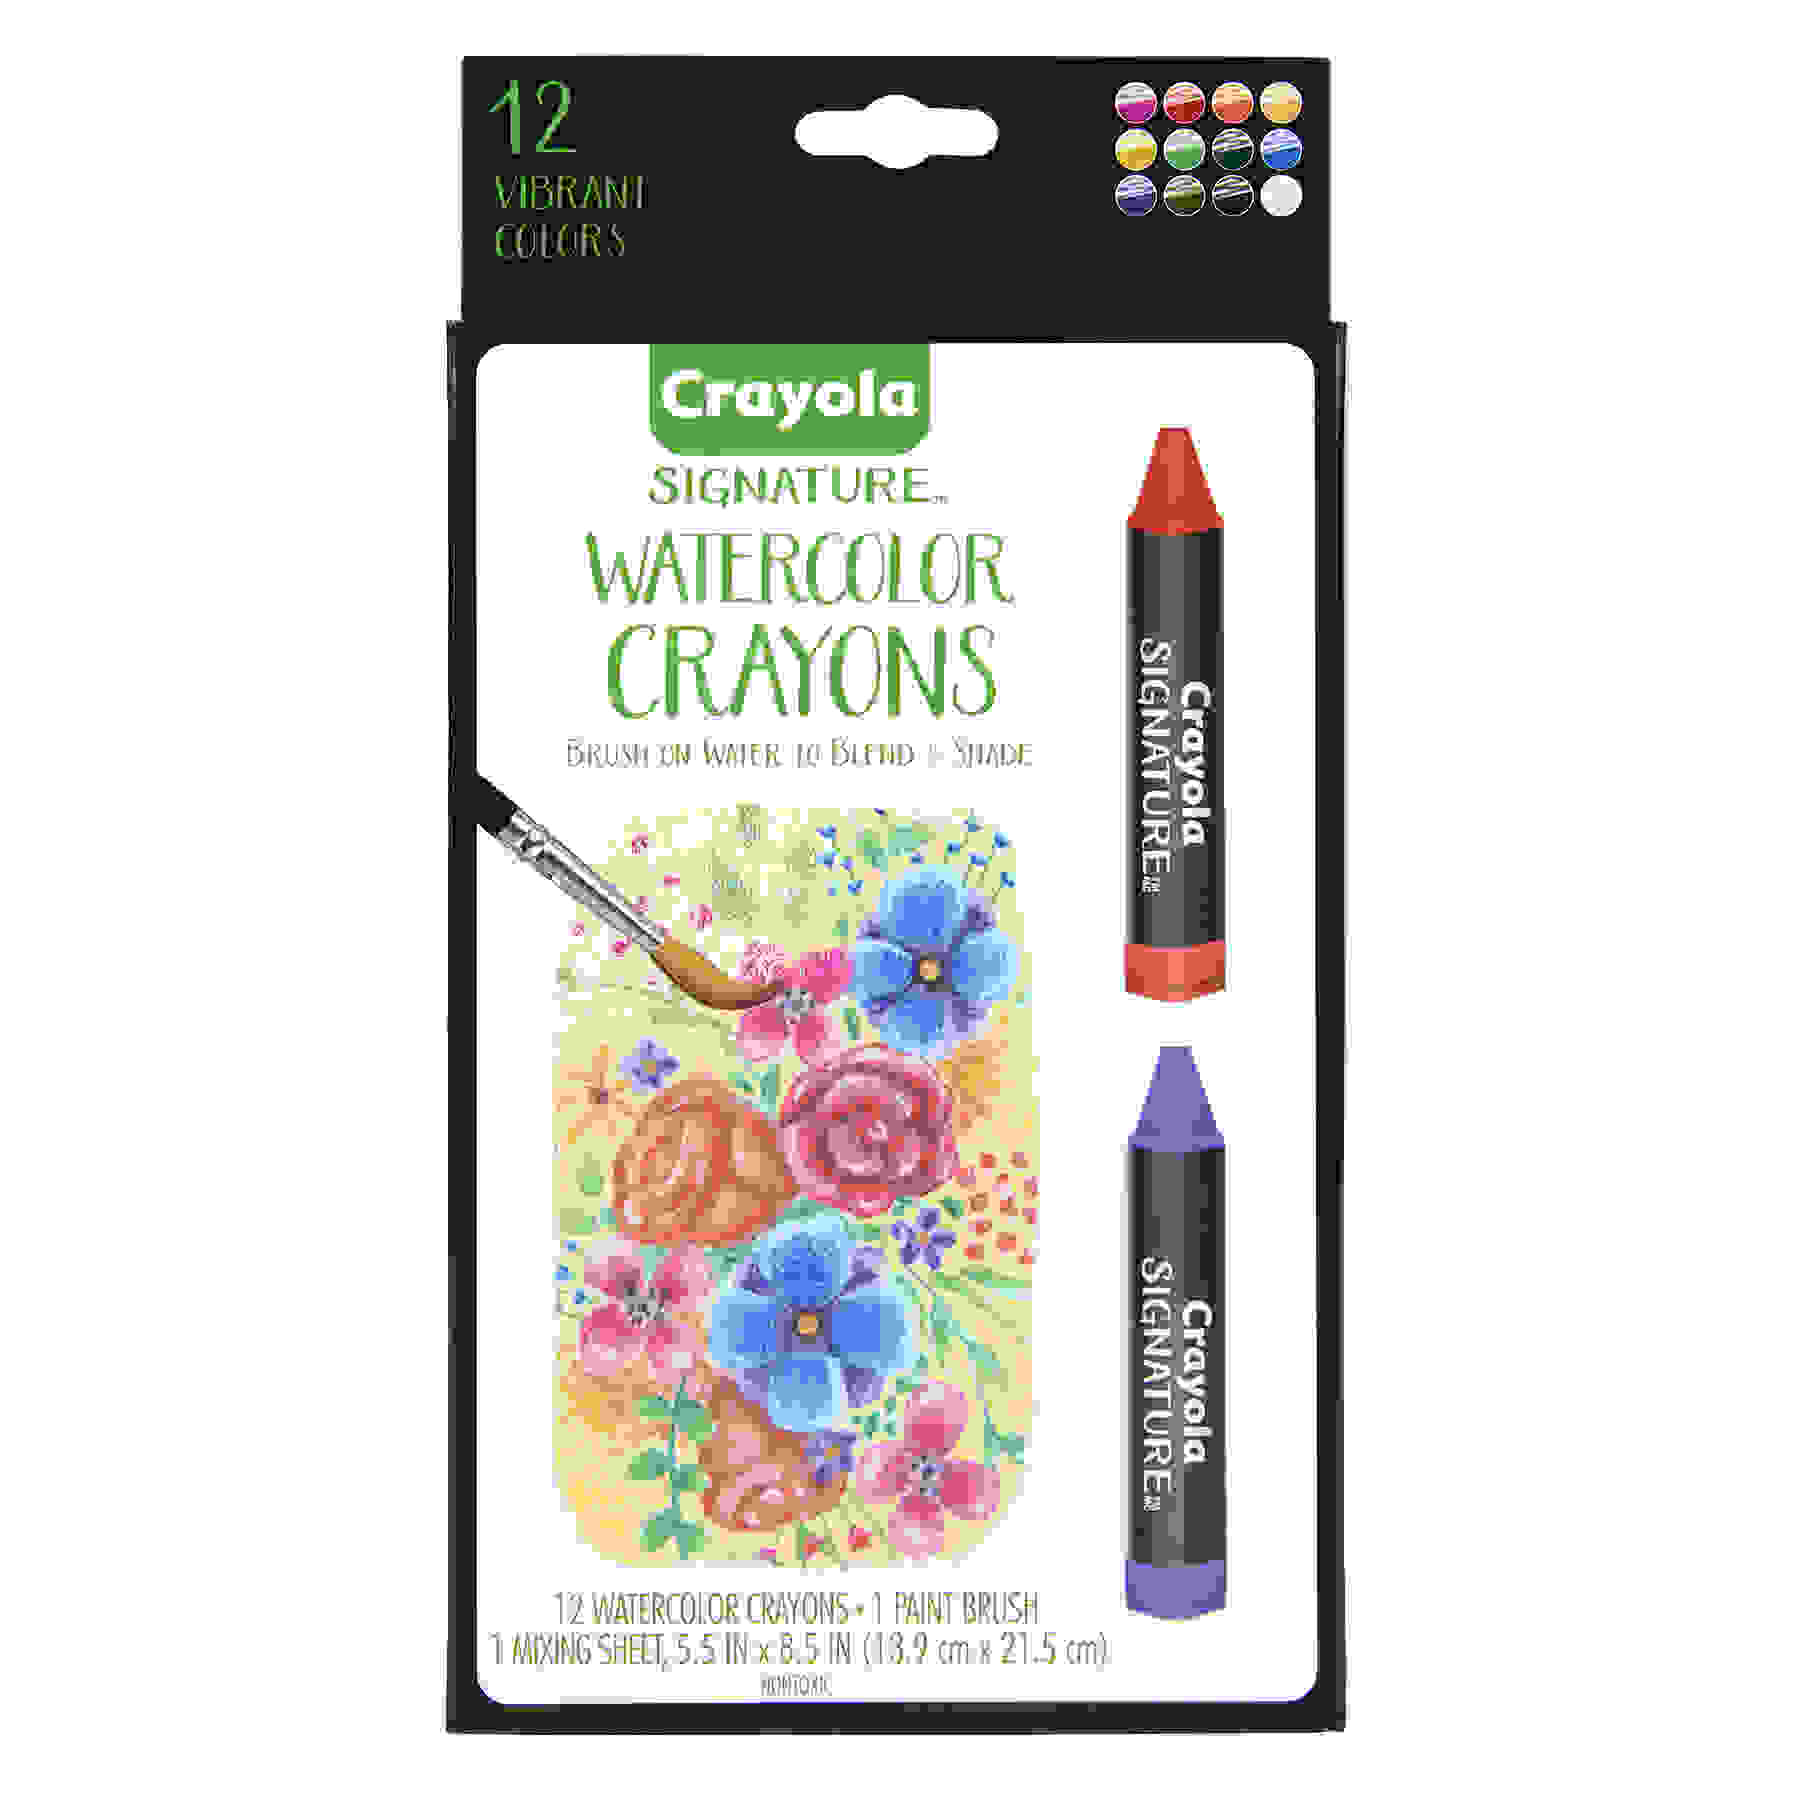 Signature Watercolor Crayons, Pack of 12